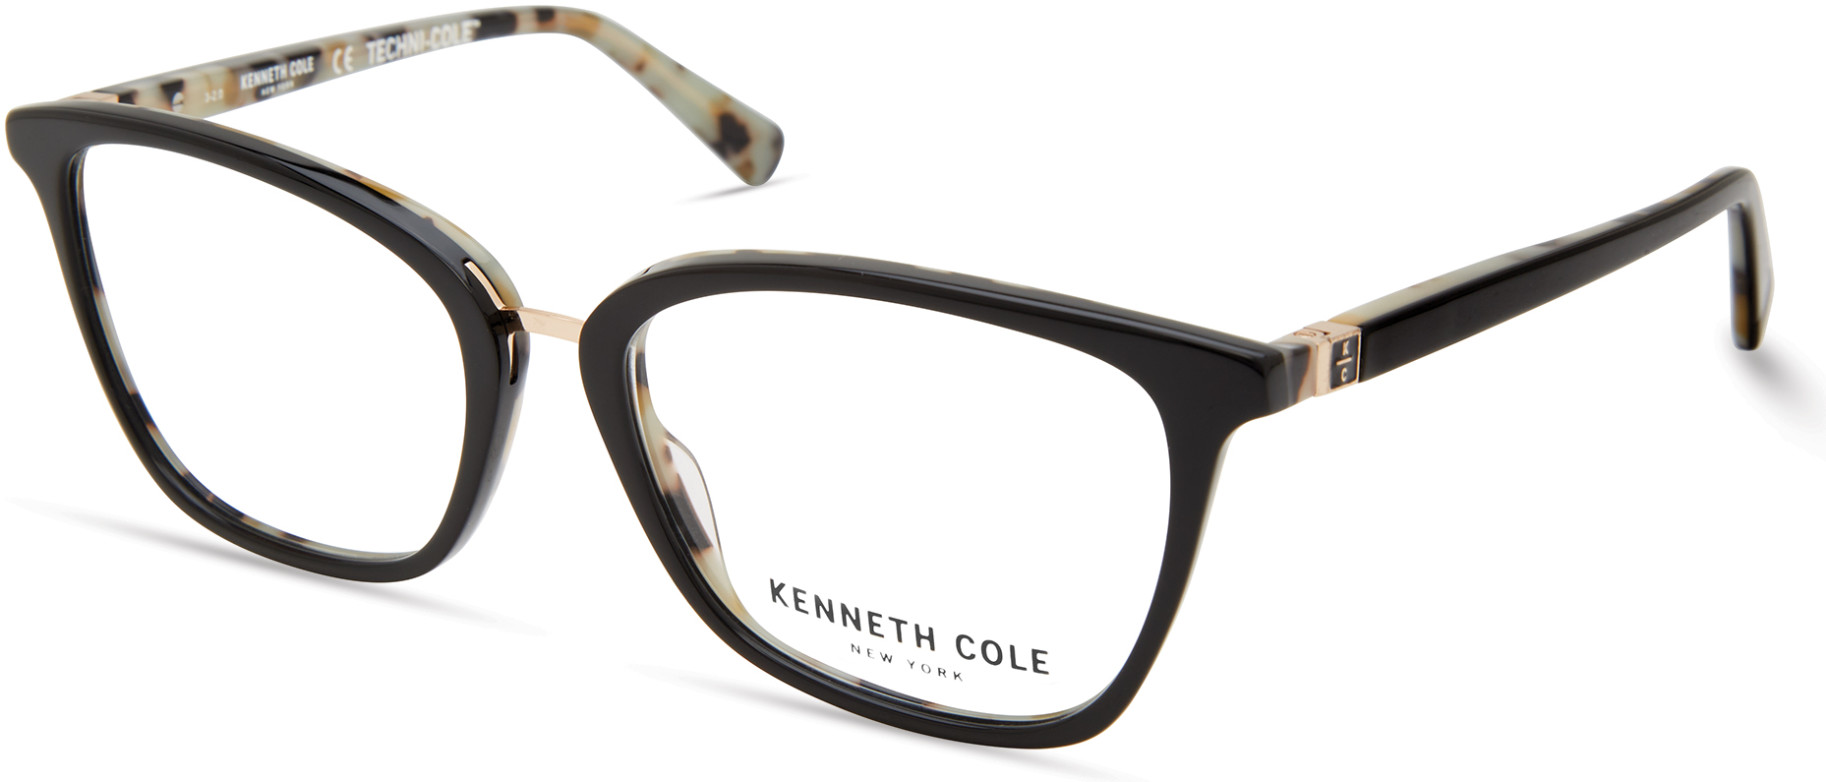 KENNETH COLE NY 0328 005